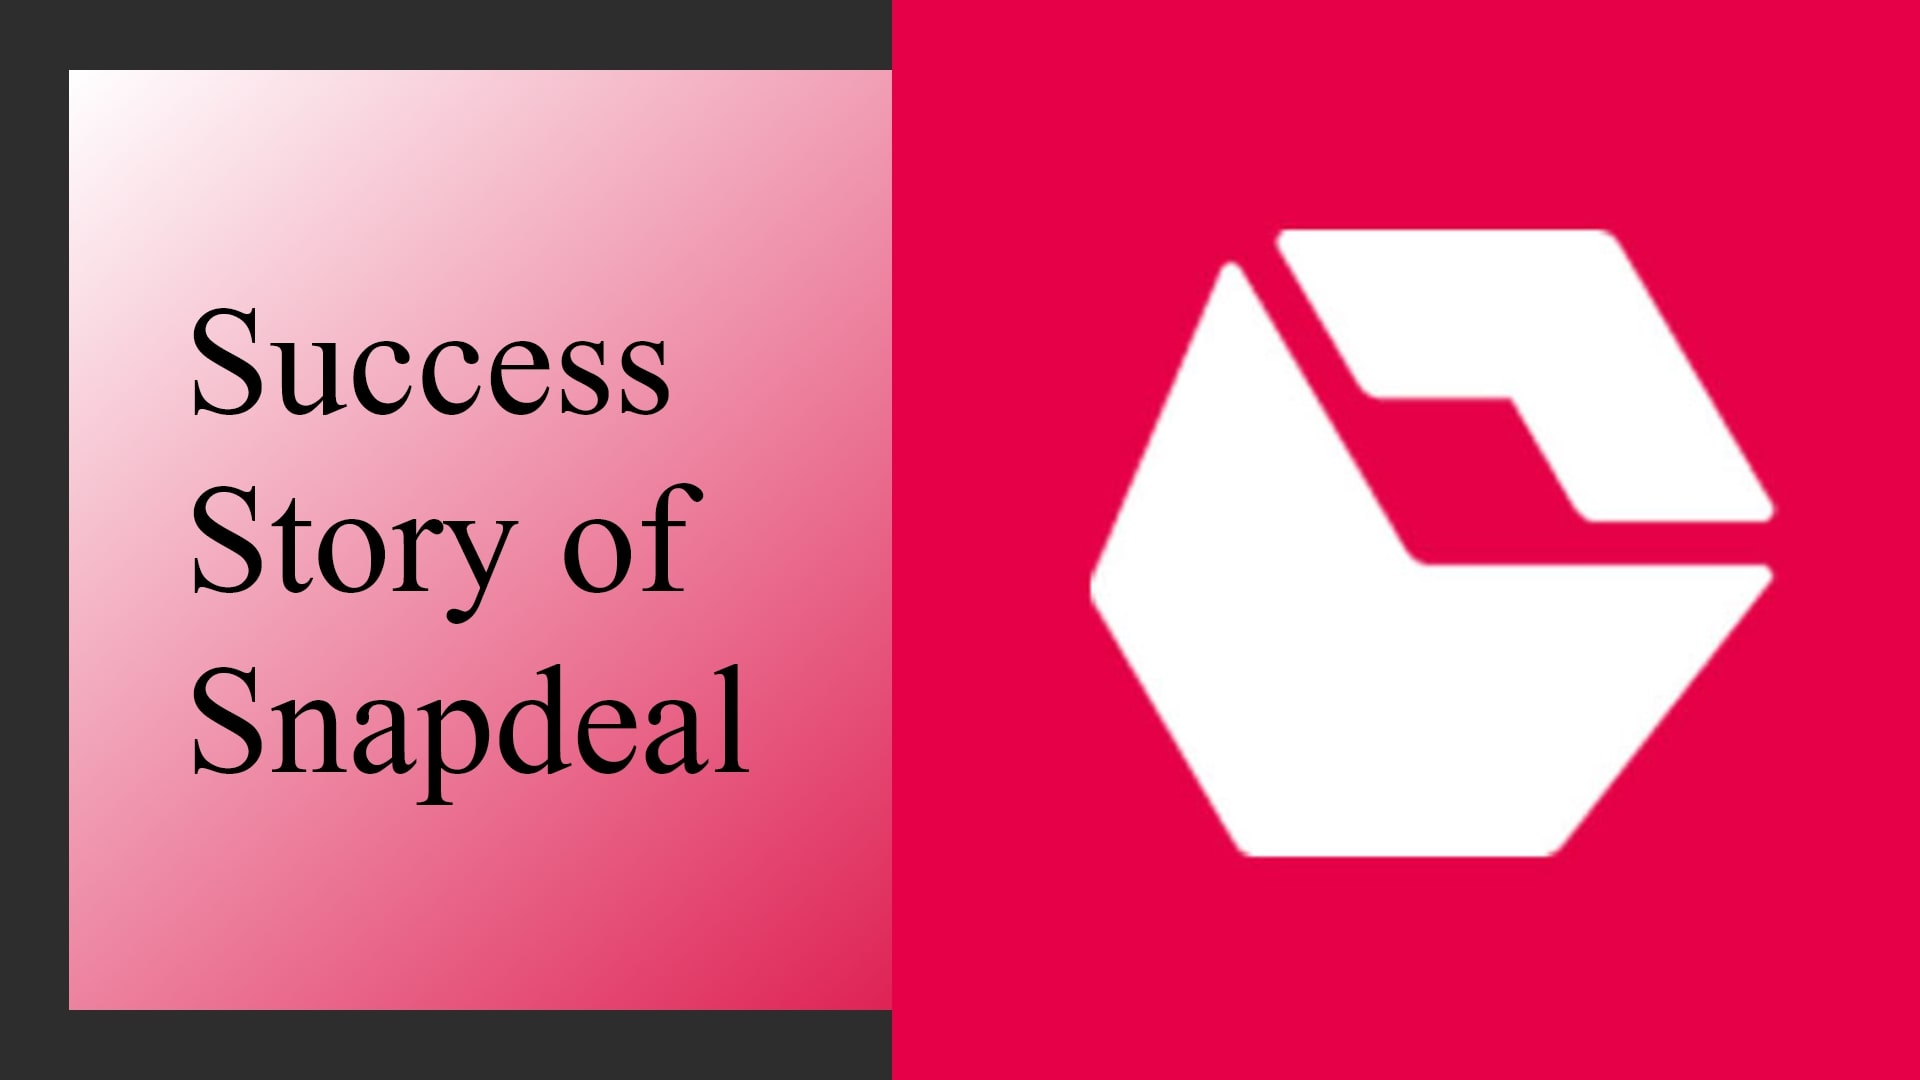 Snapdeal Success Story